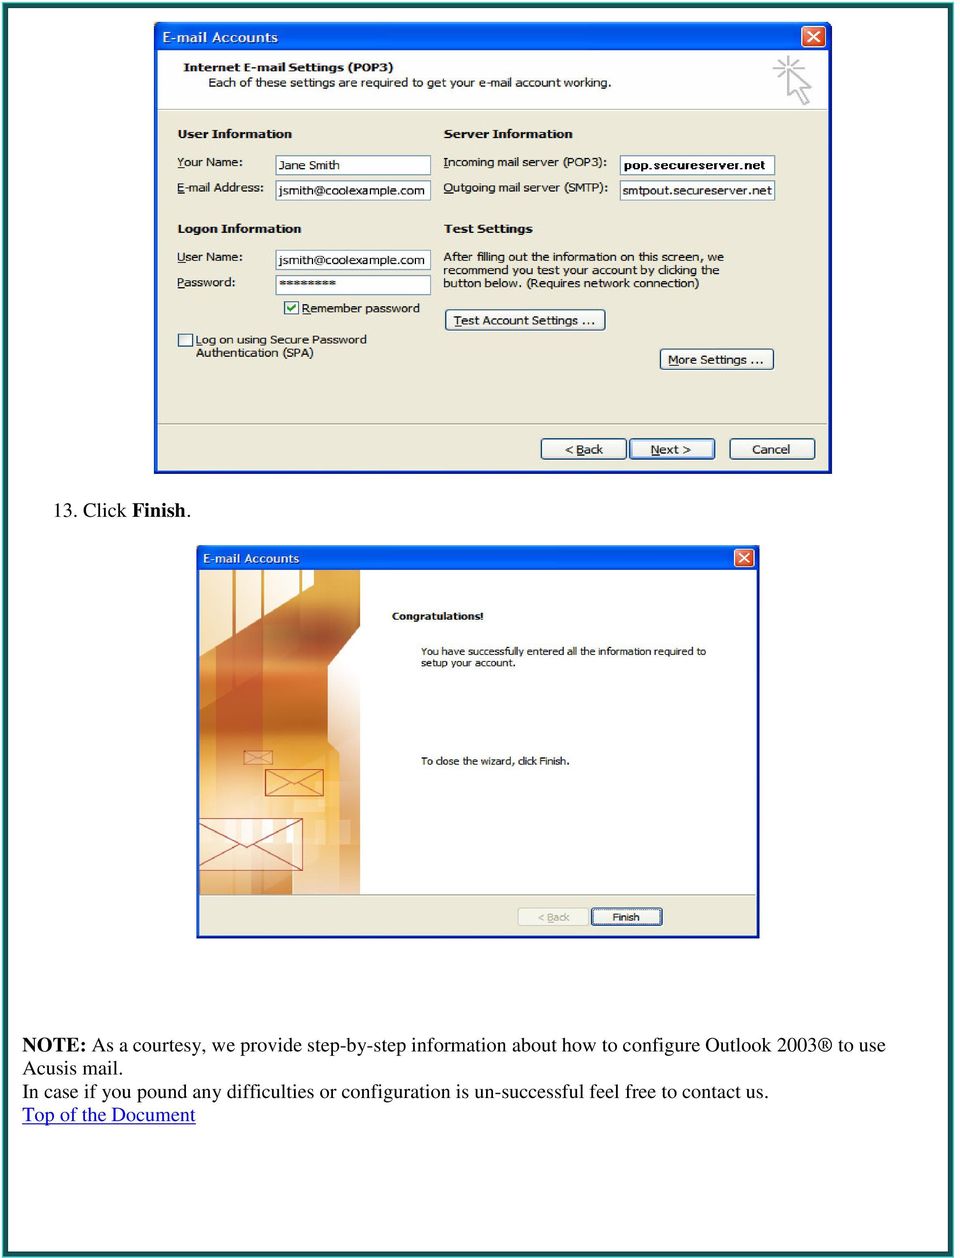 about how to configure Outlook 2003 to use Acusis mail.